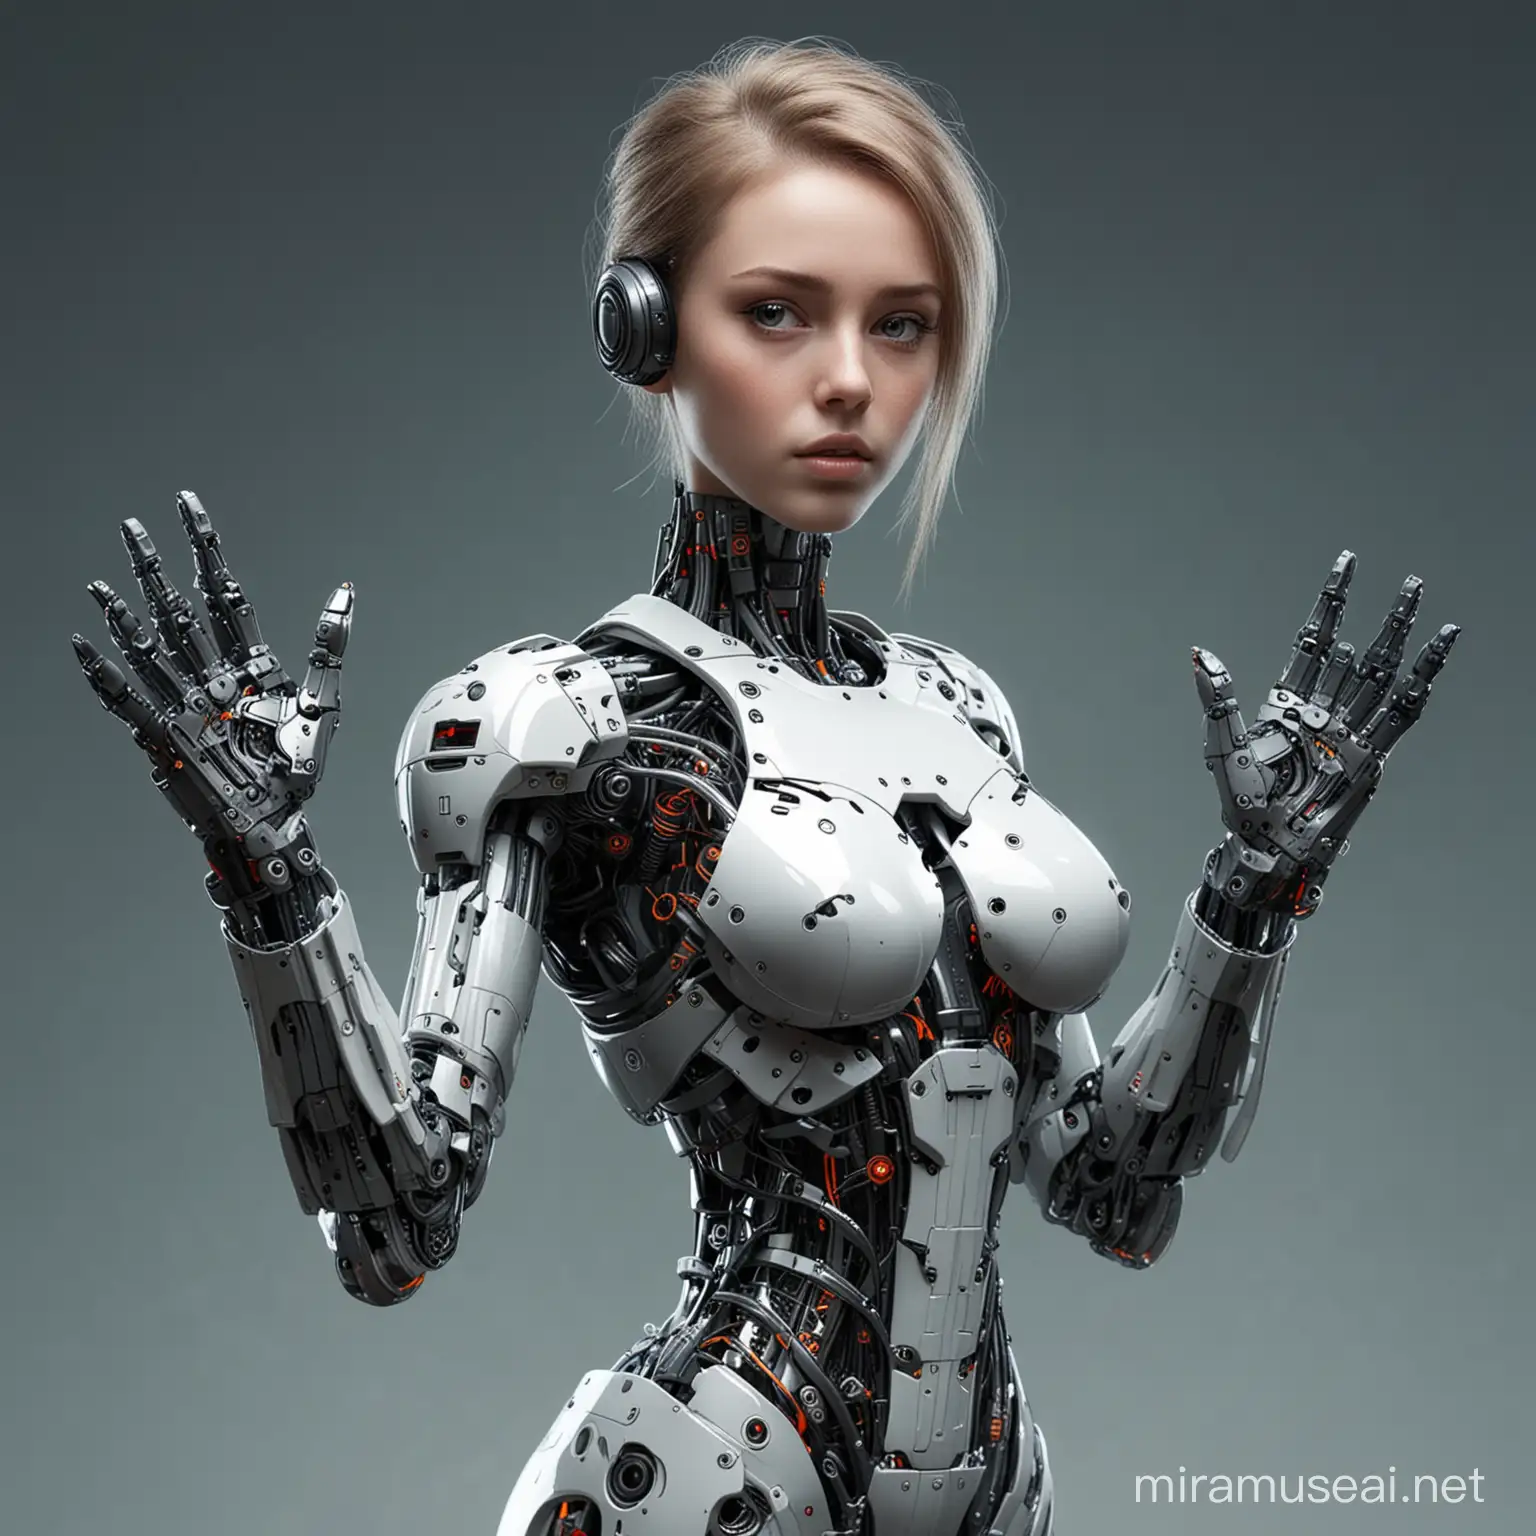 Futuristic Robot Girl with Mechanical Vice Hands